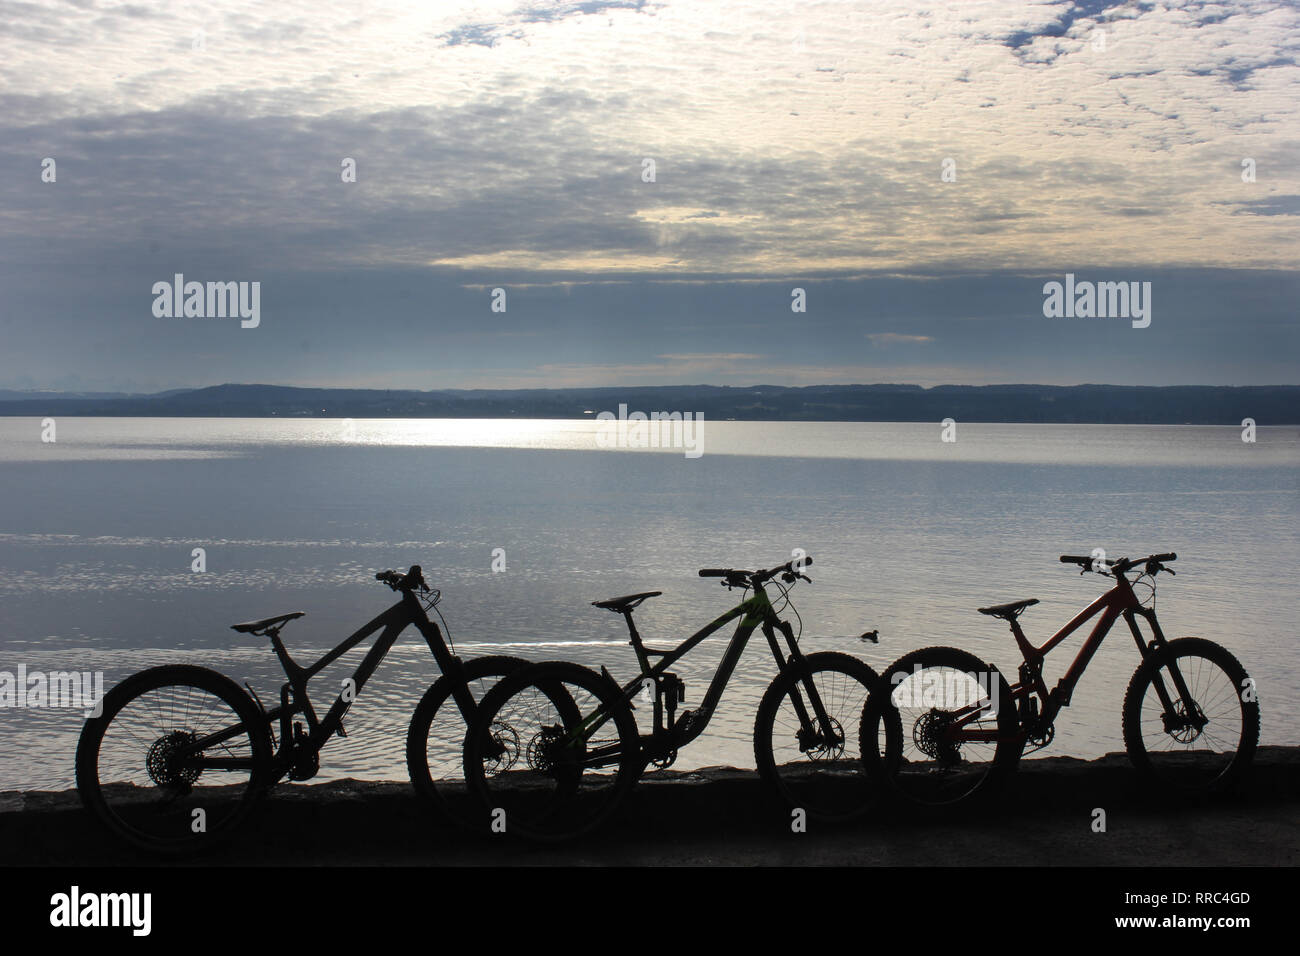 Group of three mountain bike silhouettes in front of lake Ammersee, bavaria, Herrsching. Horizon over water. Stock Photo